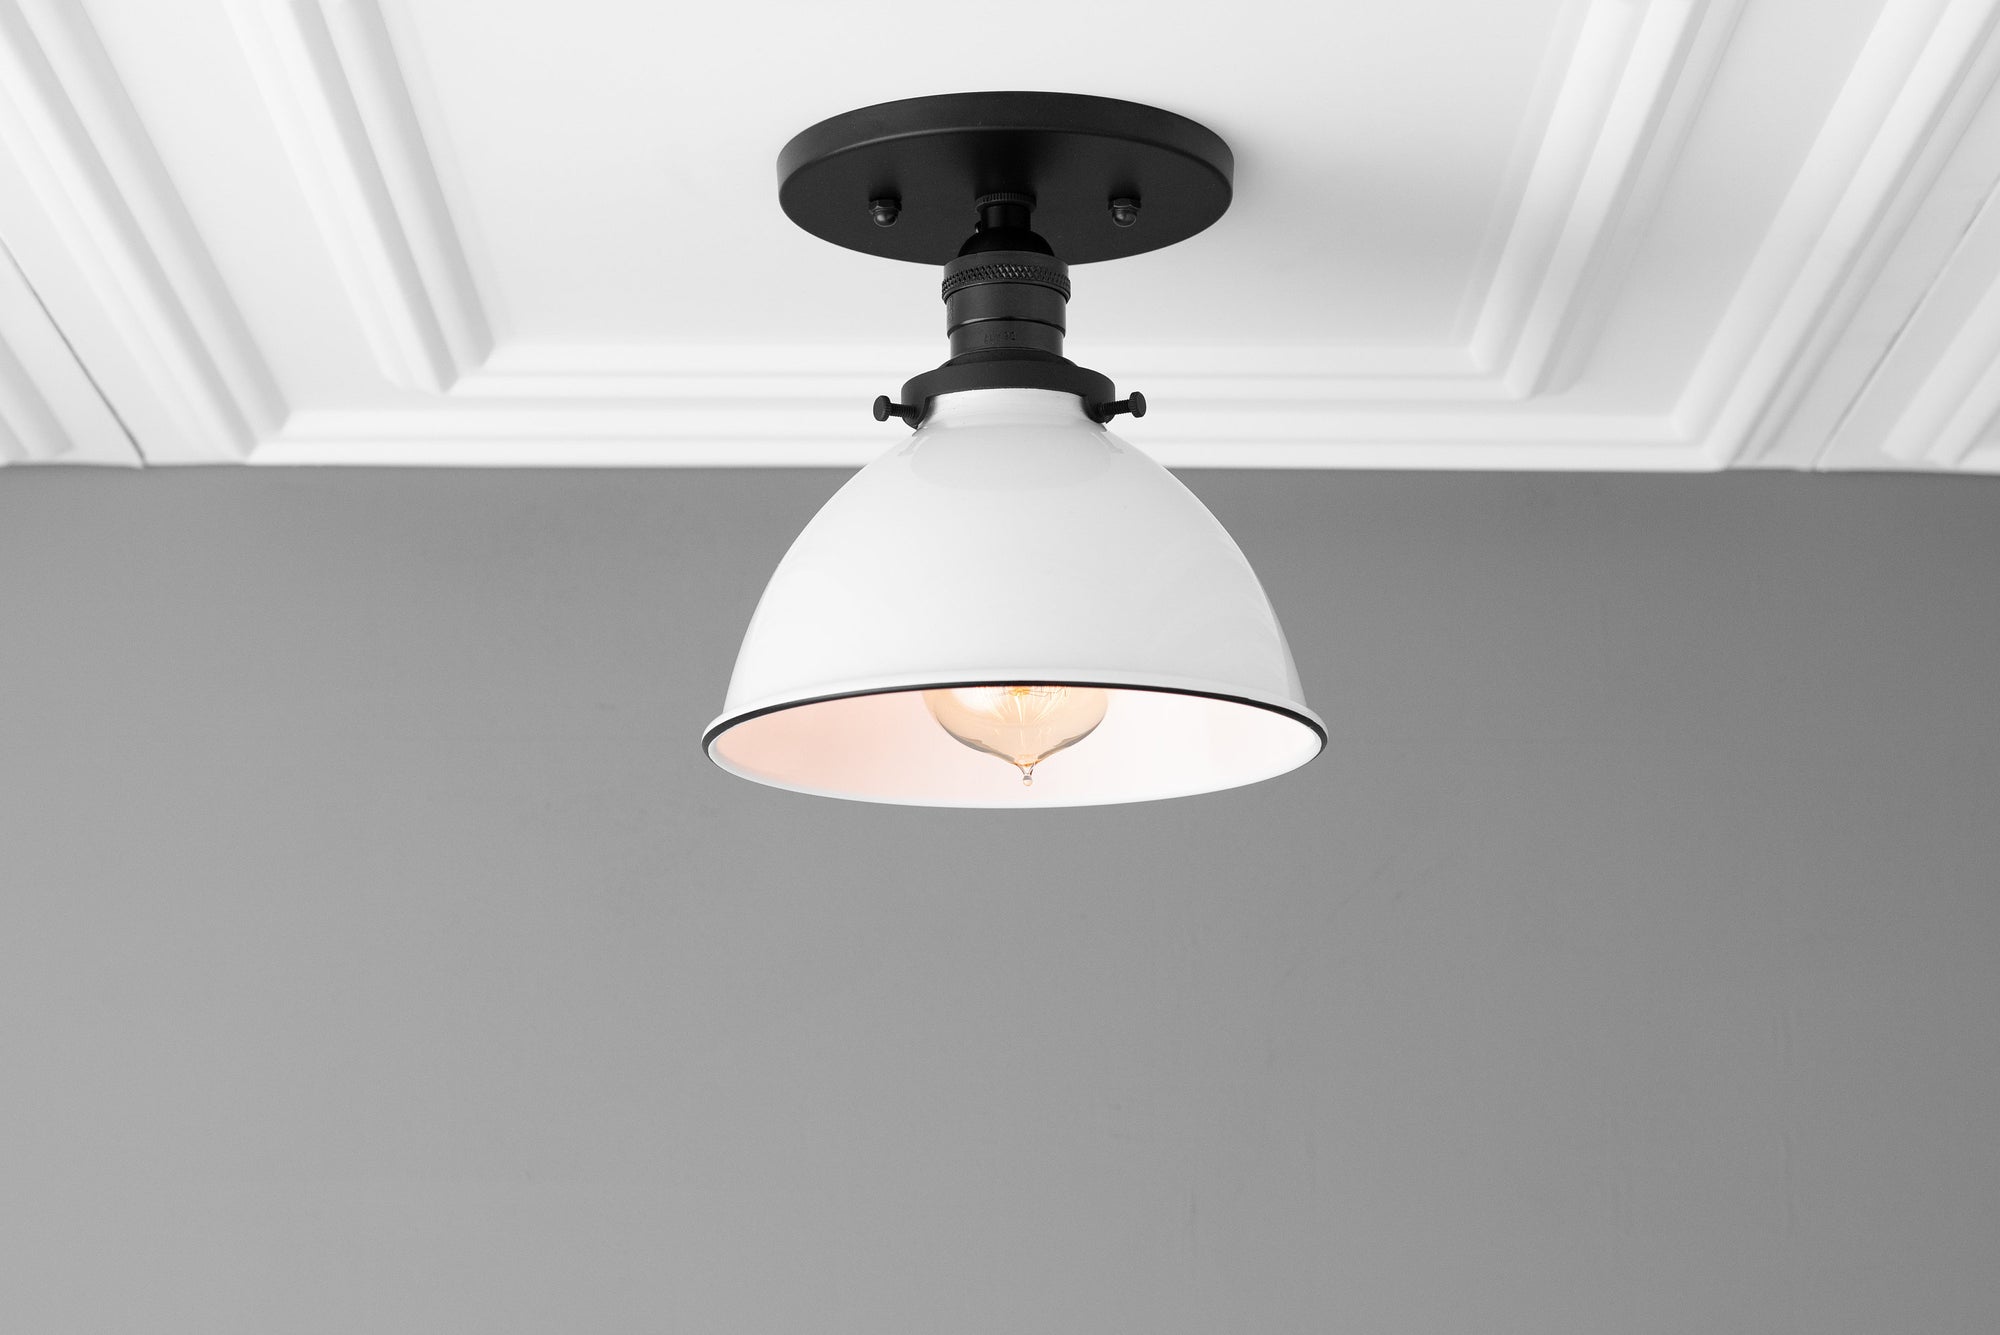 Ceiling Light Model No 9097 Peared Creation